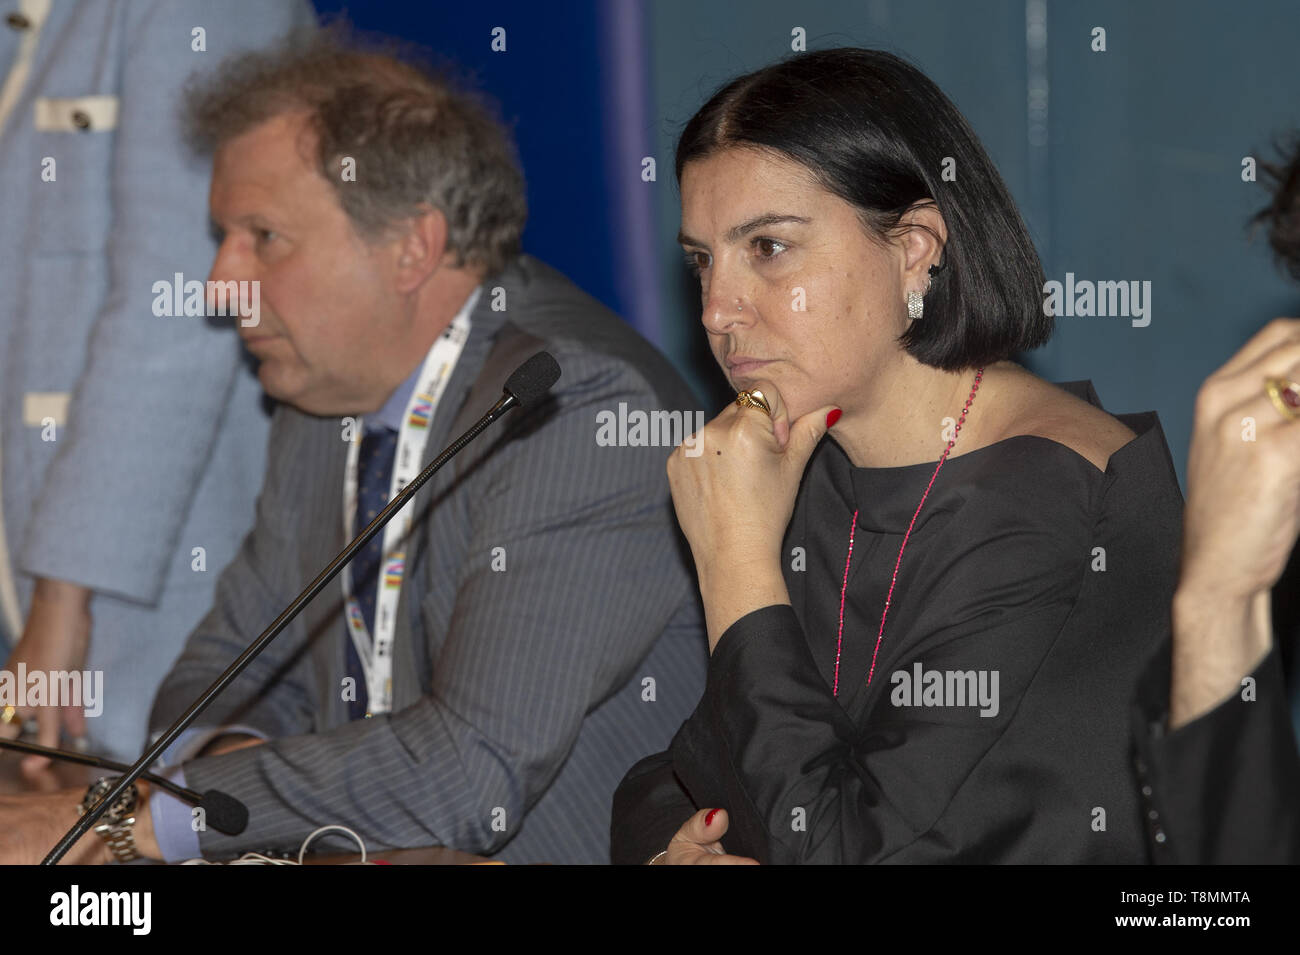 Maurizia Rebola, guest during the XXXII Turin International Book Fair at Lingotto Fiere on May 13, 2019 in Turin, Italy. (Photo by Antonio Polia / Pacific Press) Stock Photo